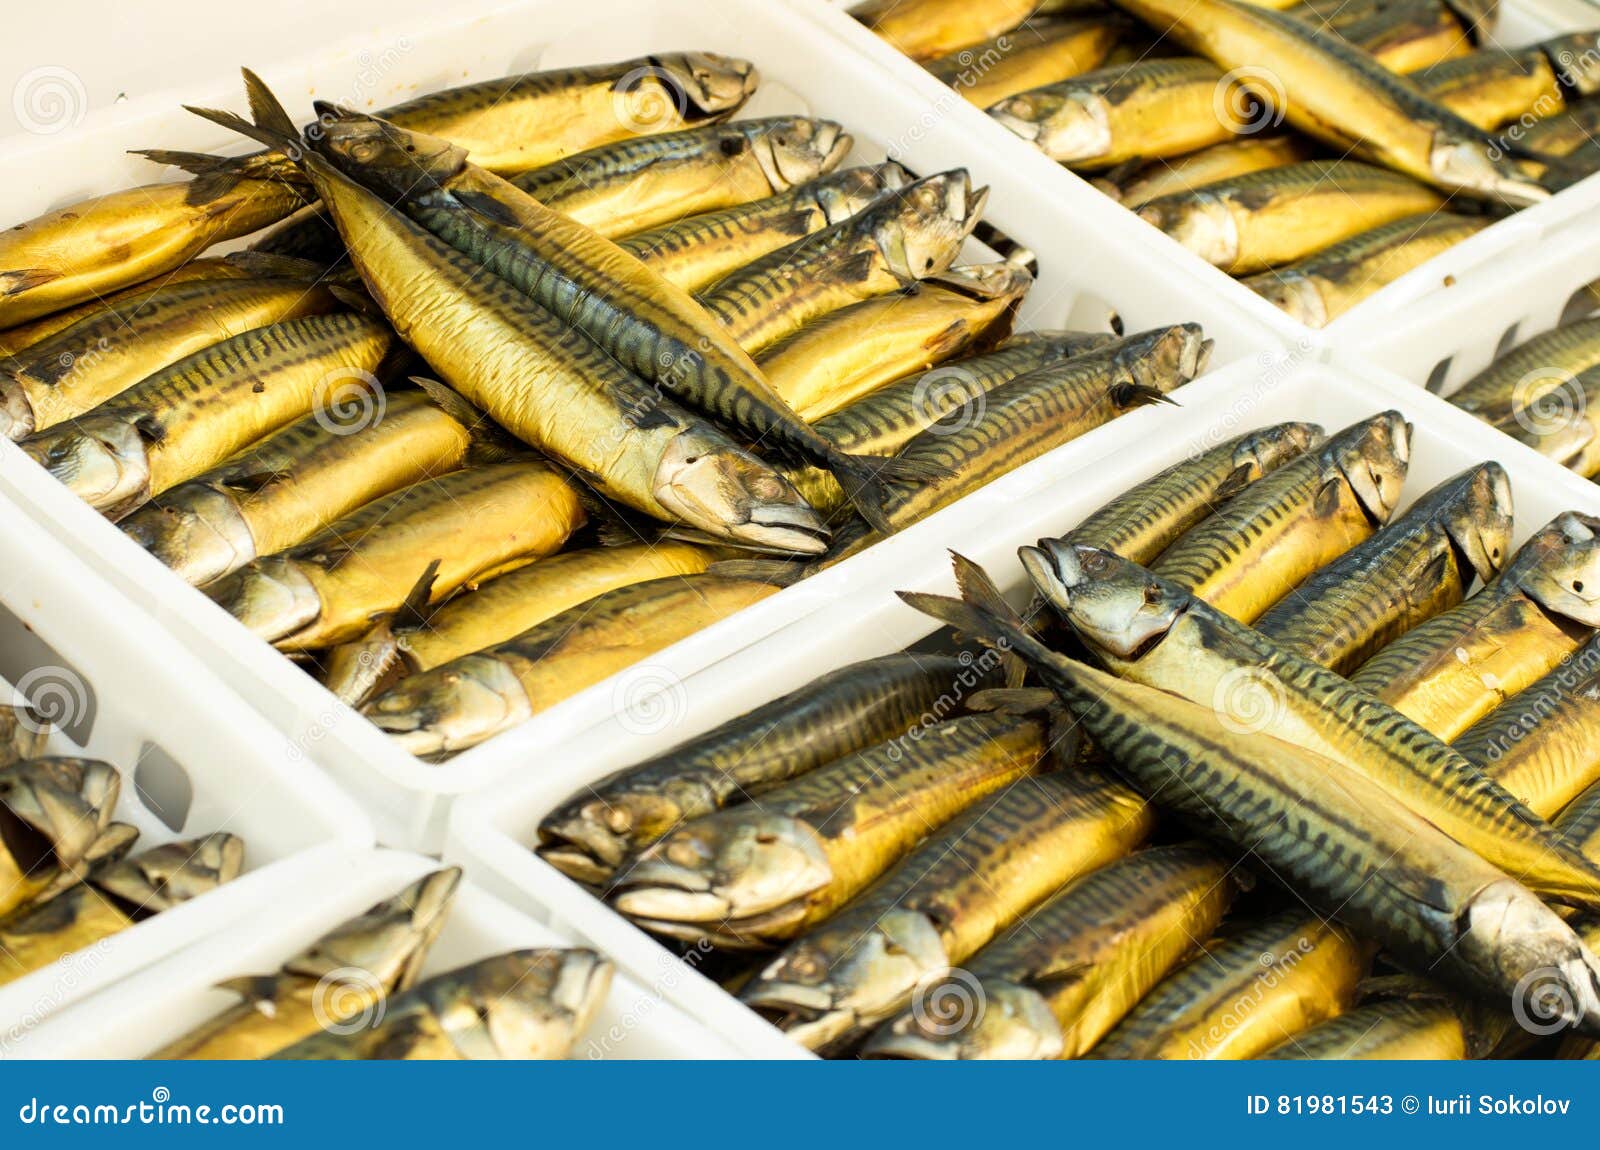 trays with smoked mackerel scomber in market